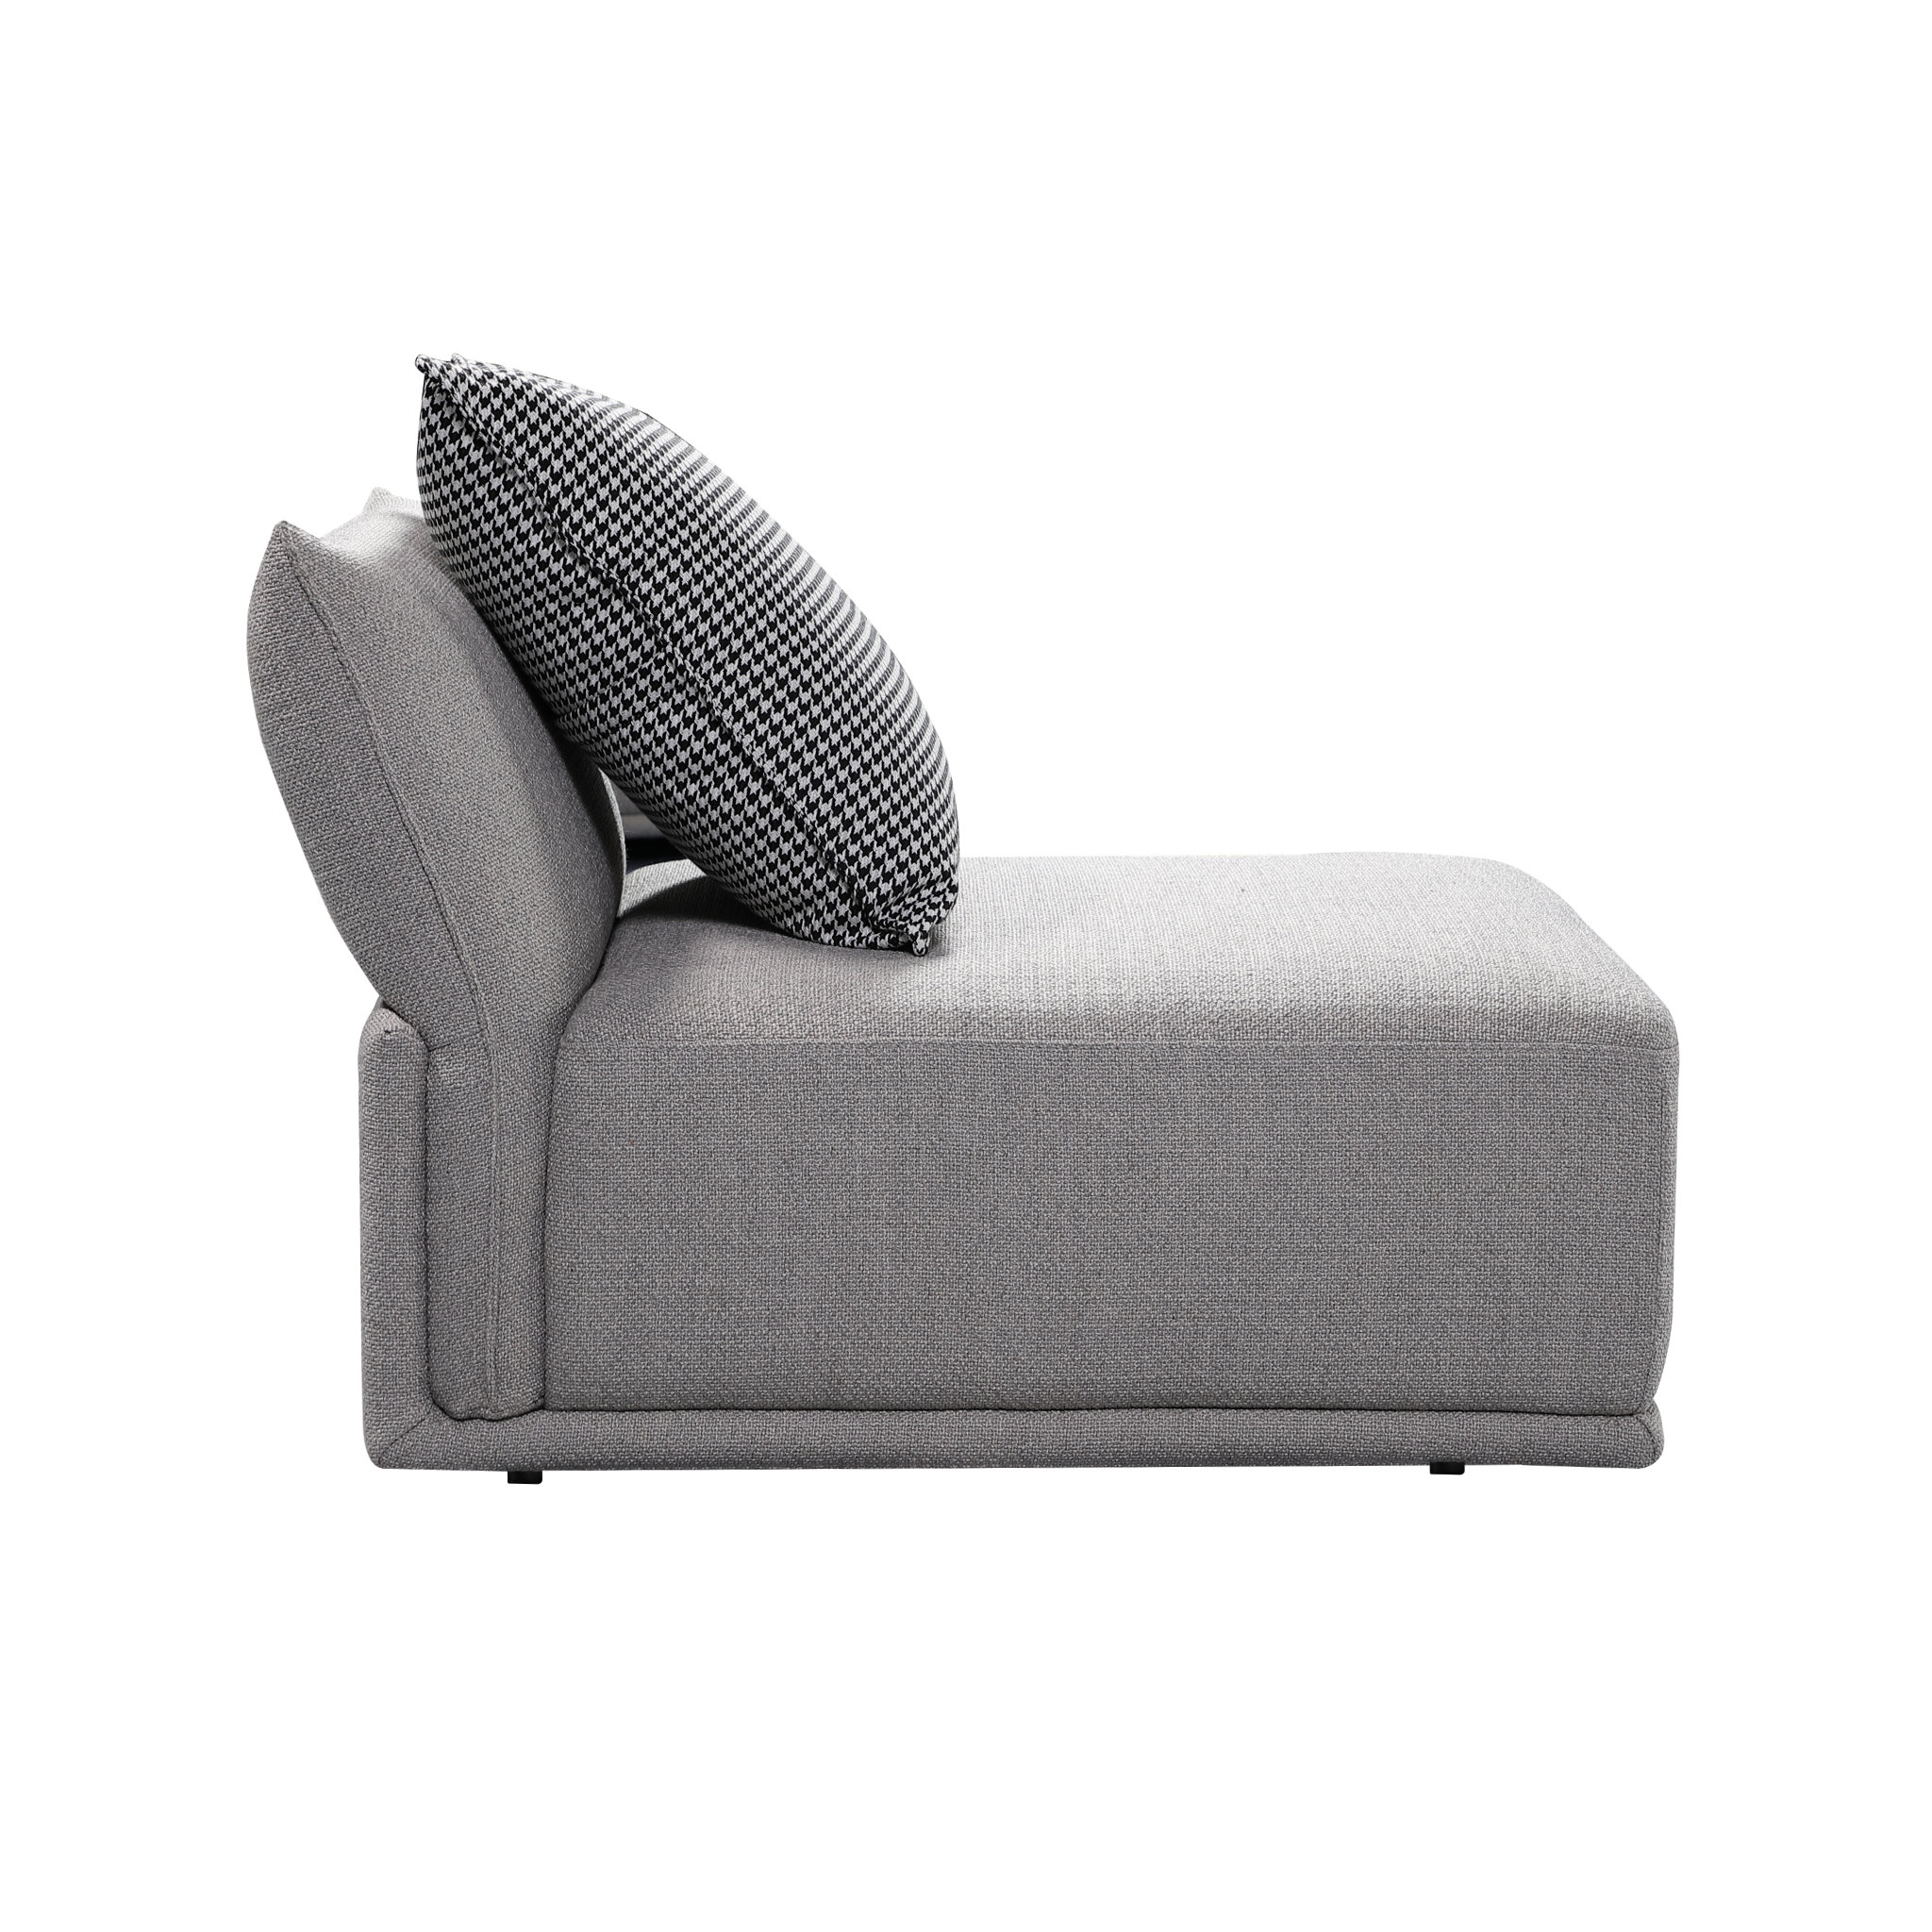 https://expandfurniture.com/wp-content/uploads/2017/05/Stratus-single-sofa-module-in-grey-from-side.jpg